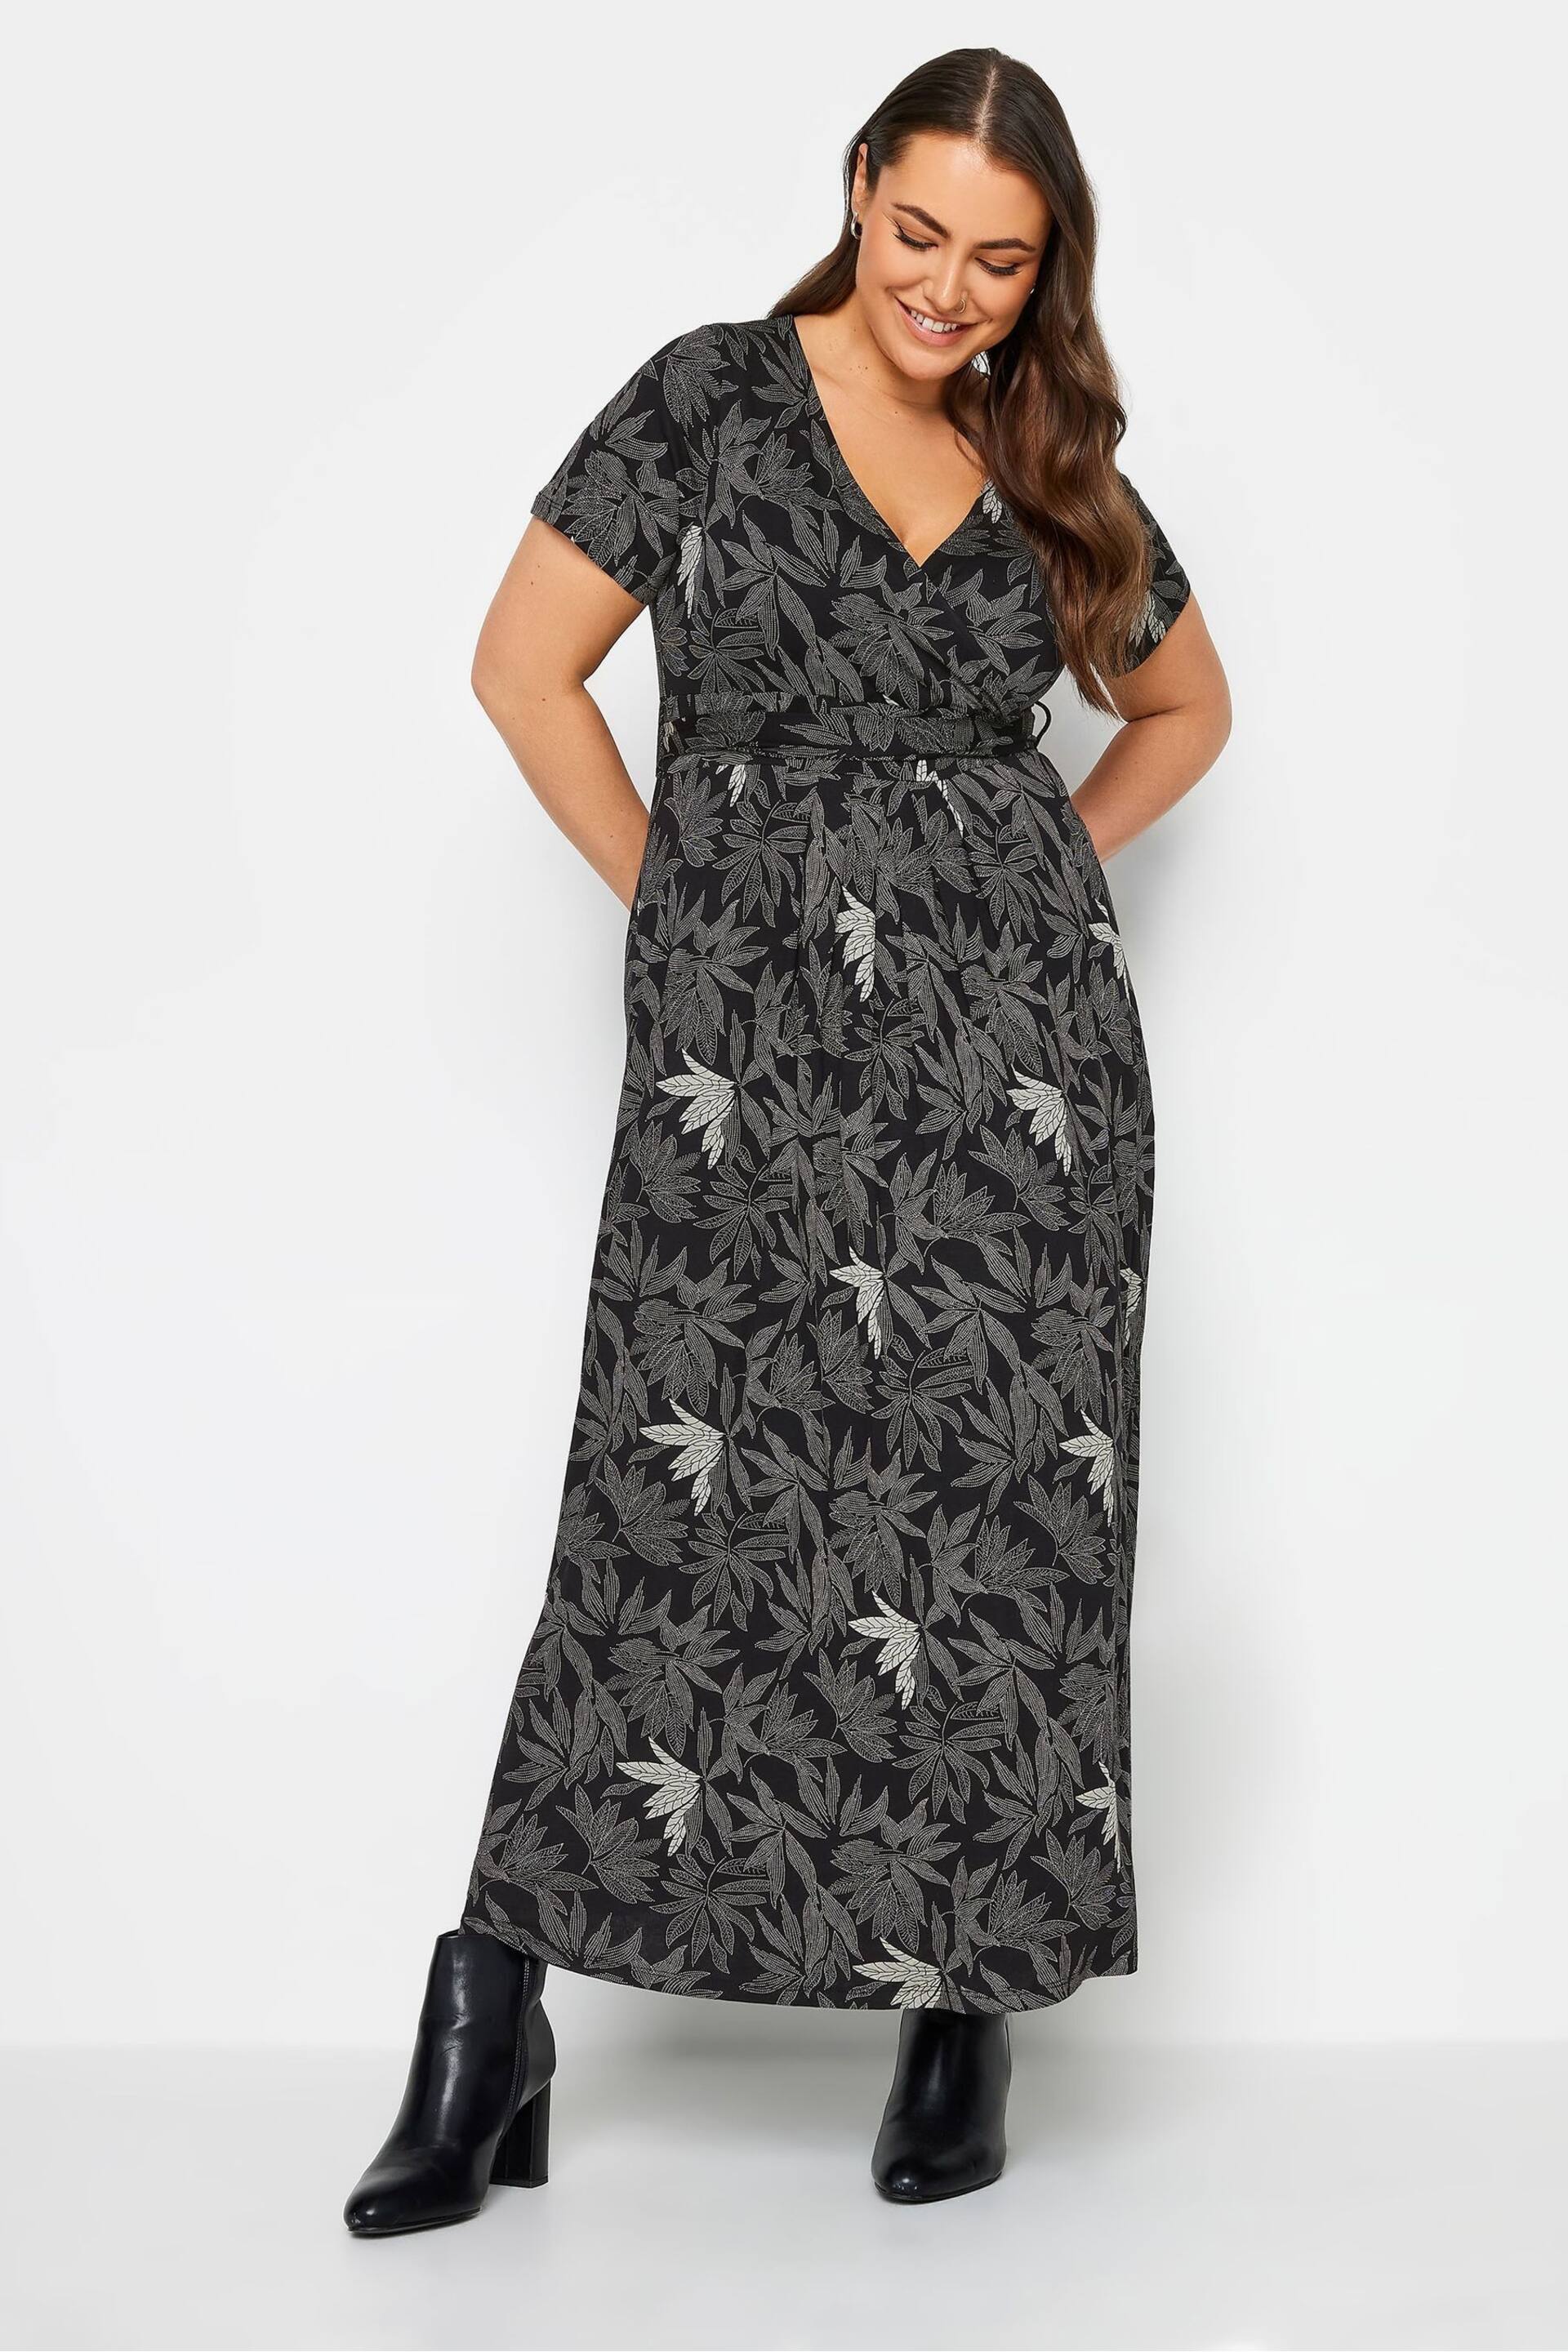 Yours Curve Black Grey Maxi Wrap Dress - Image 1 of 4